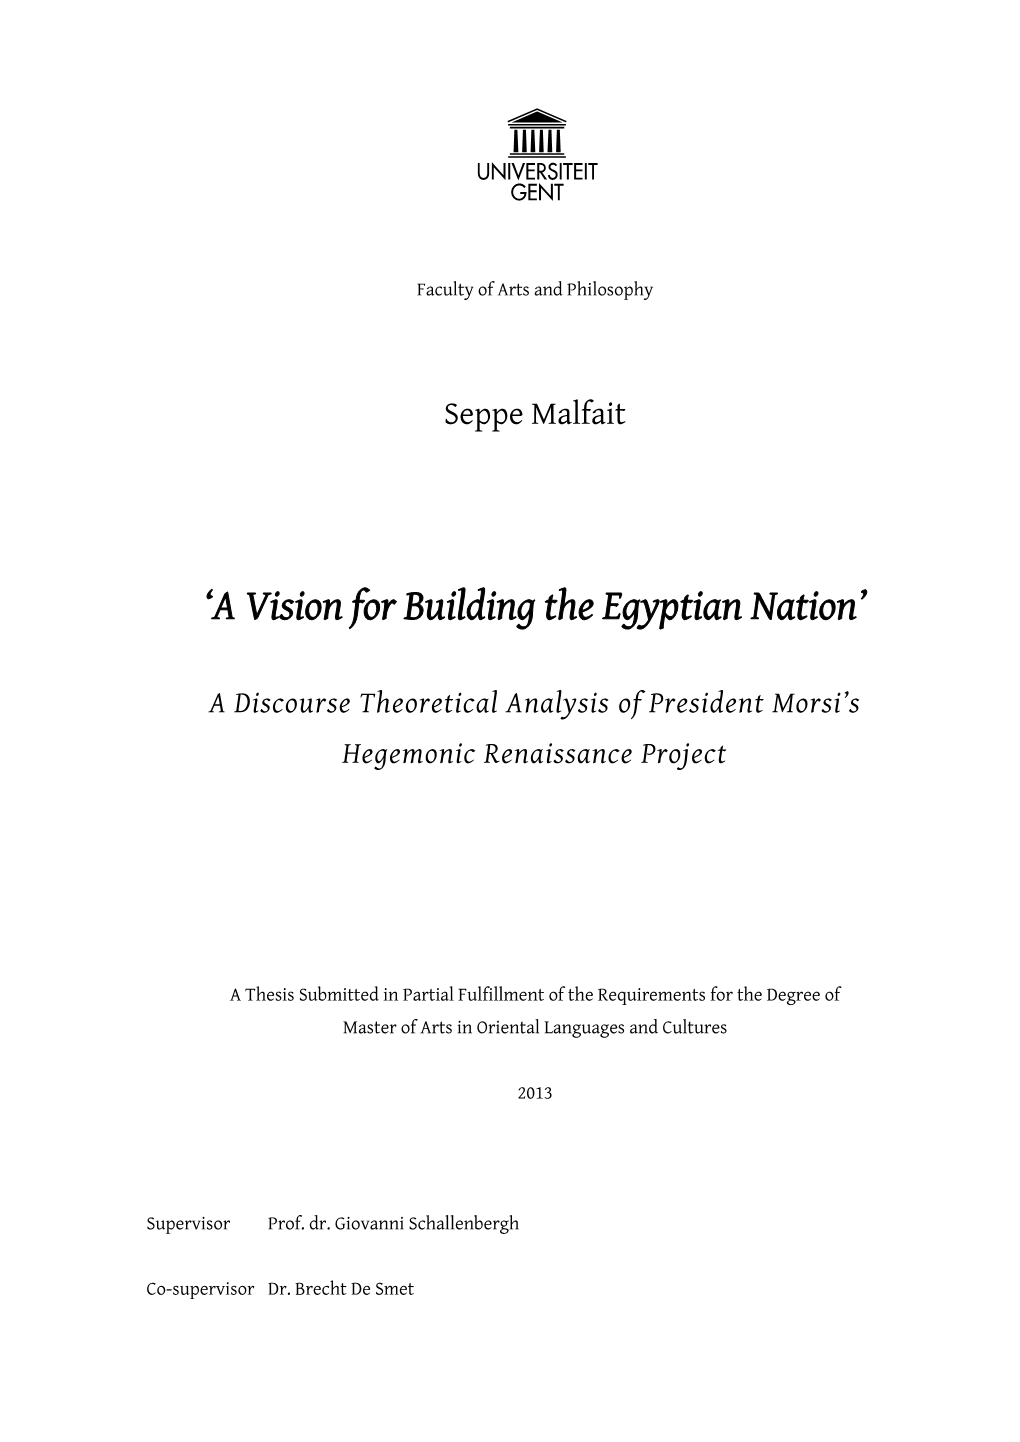 'A Vision for Building the Egyptian Nation'